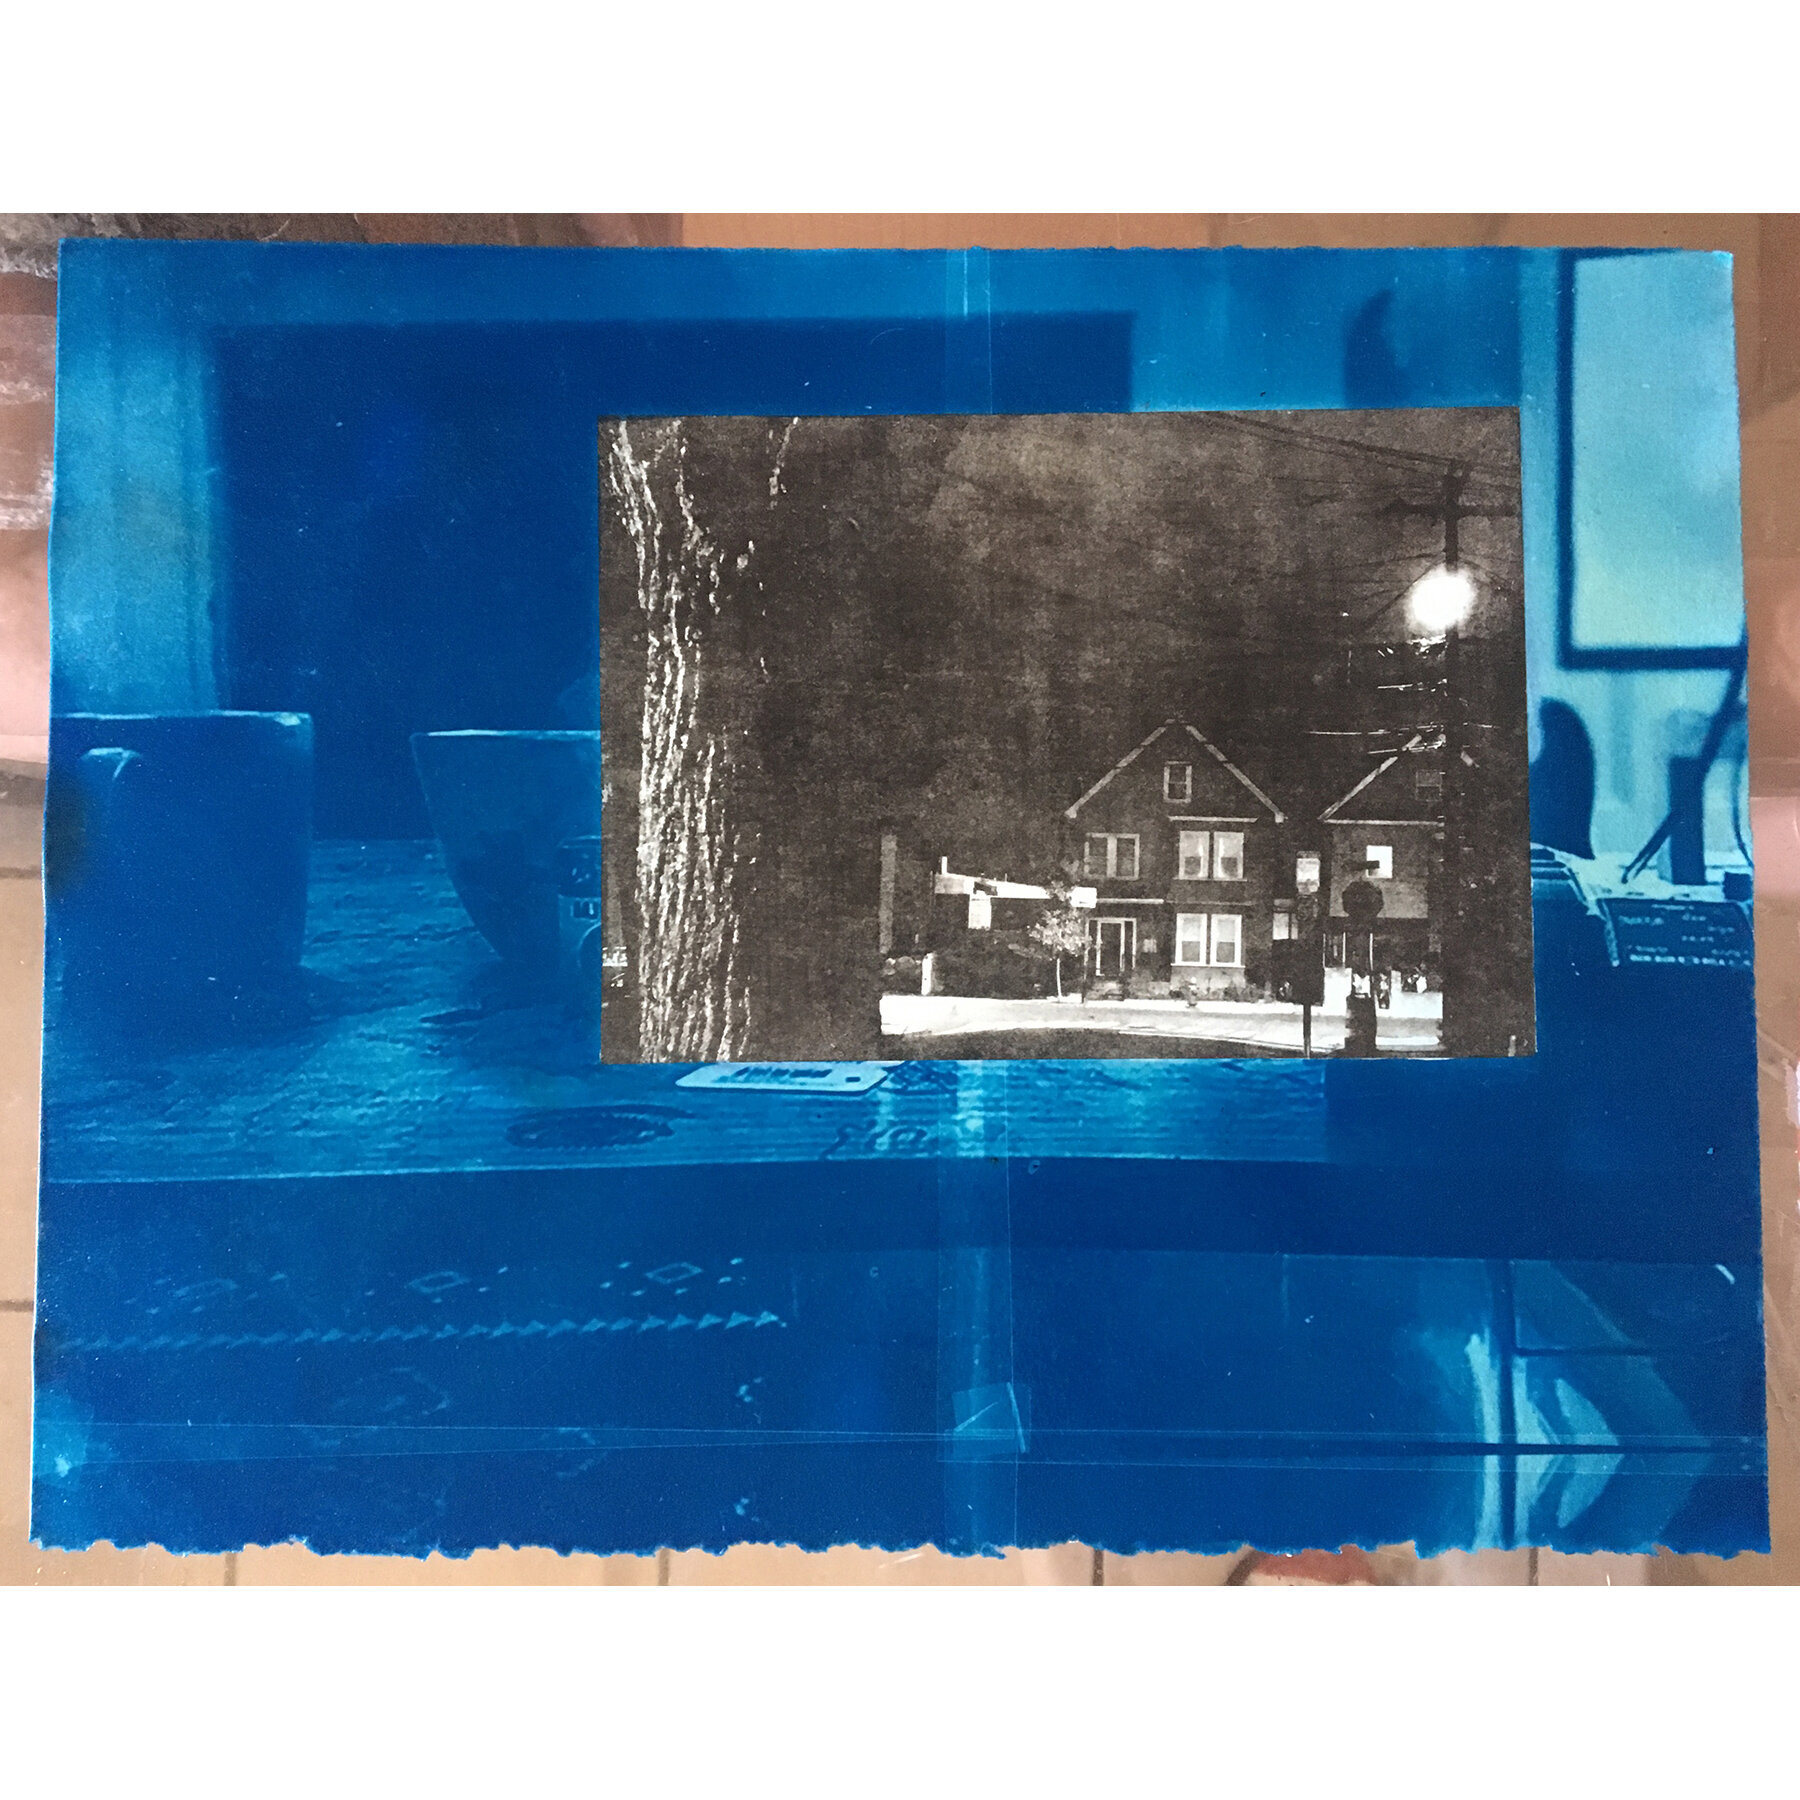  intimate knowledge; cyanotype, lithograph; 11 x 15 inches 